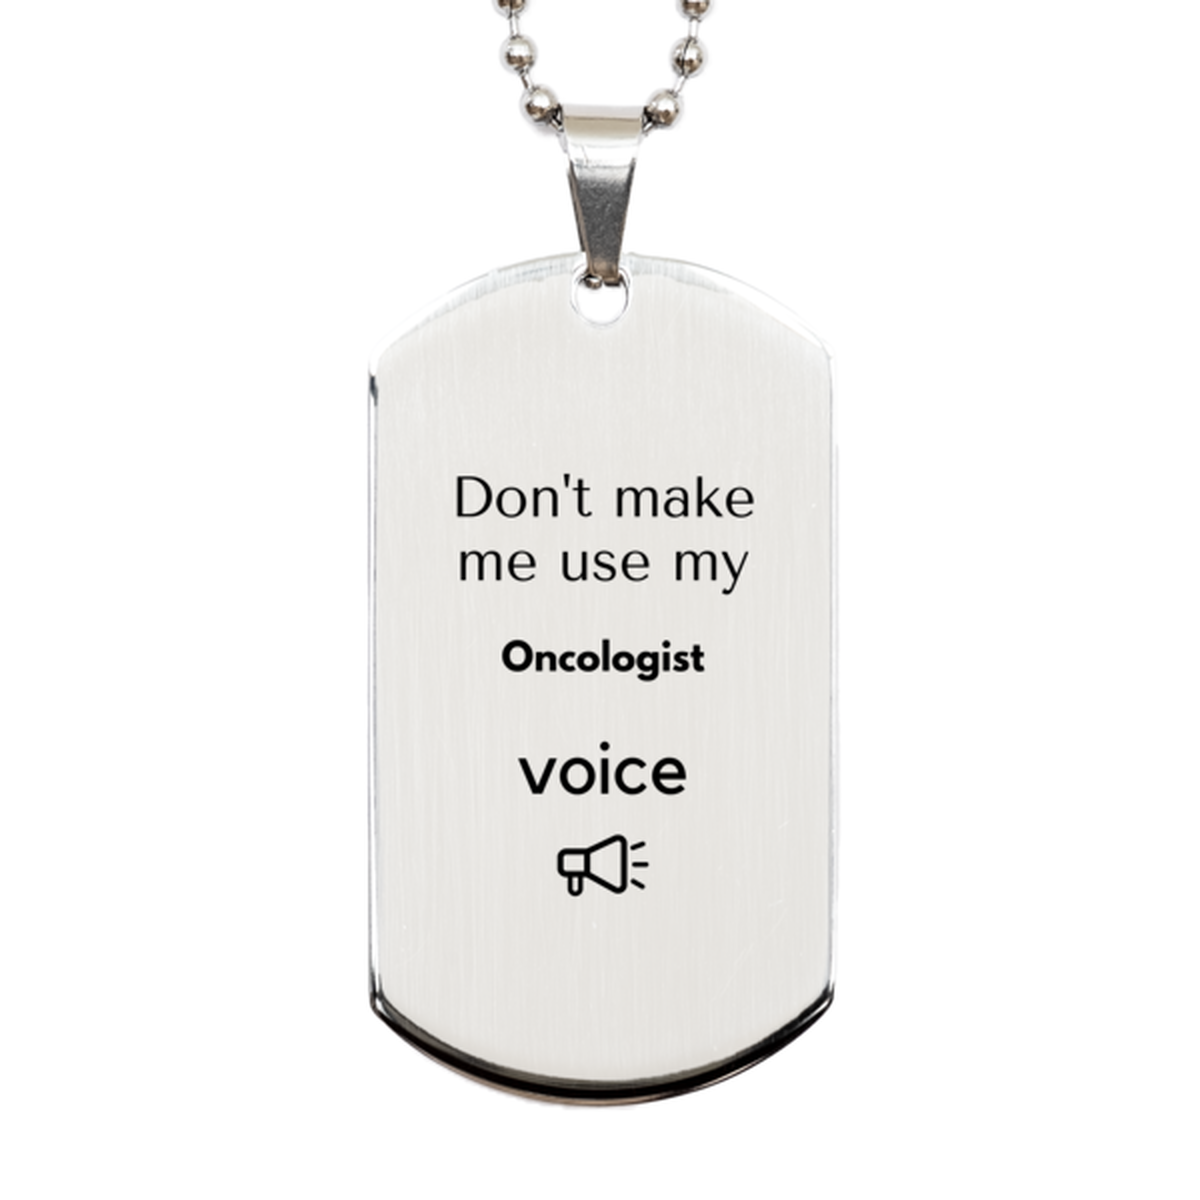 Don't make me use my Oncologist voice, Sarcasm Oncologist Gifts, Christmas Oncologist Silver Dog Tag Birthday Unique Gifts For Oncologist Coworkers, Men, Women, Colleague, Friends